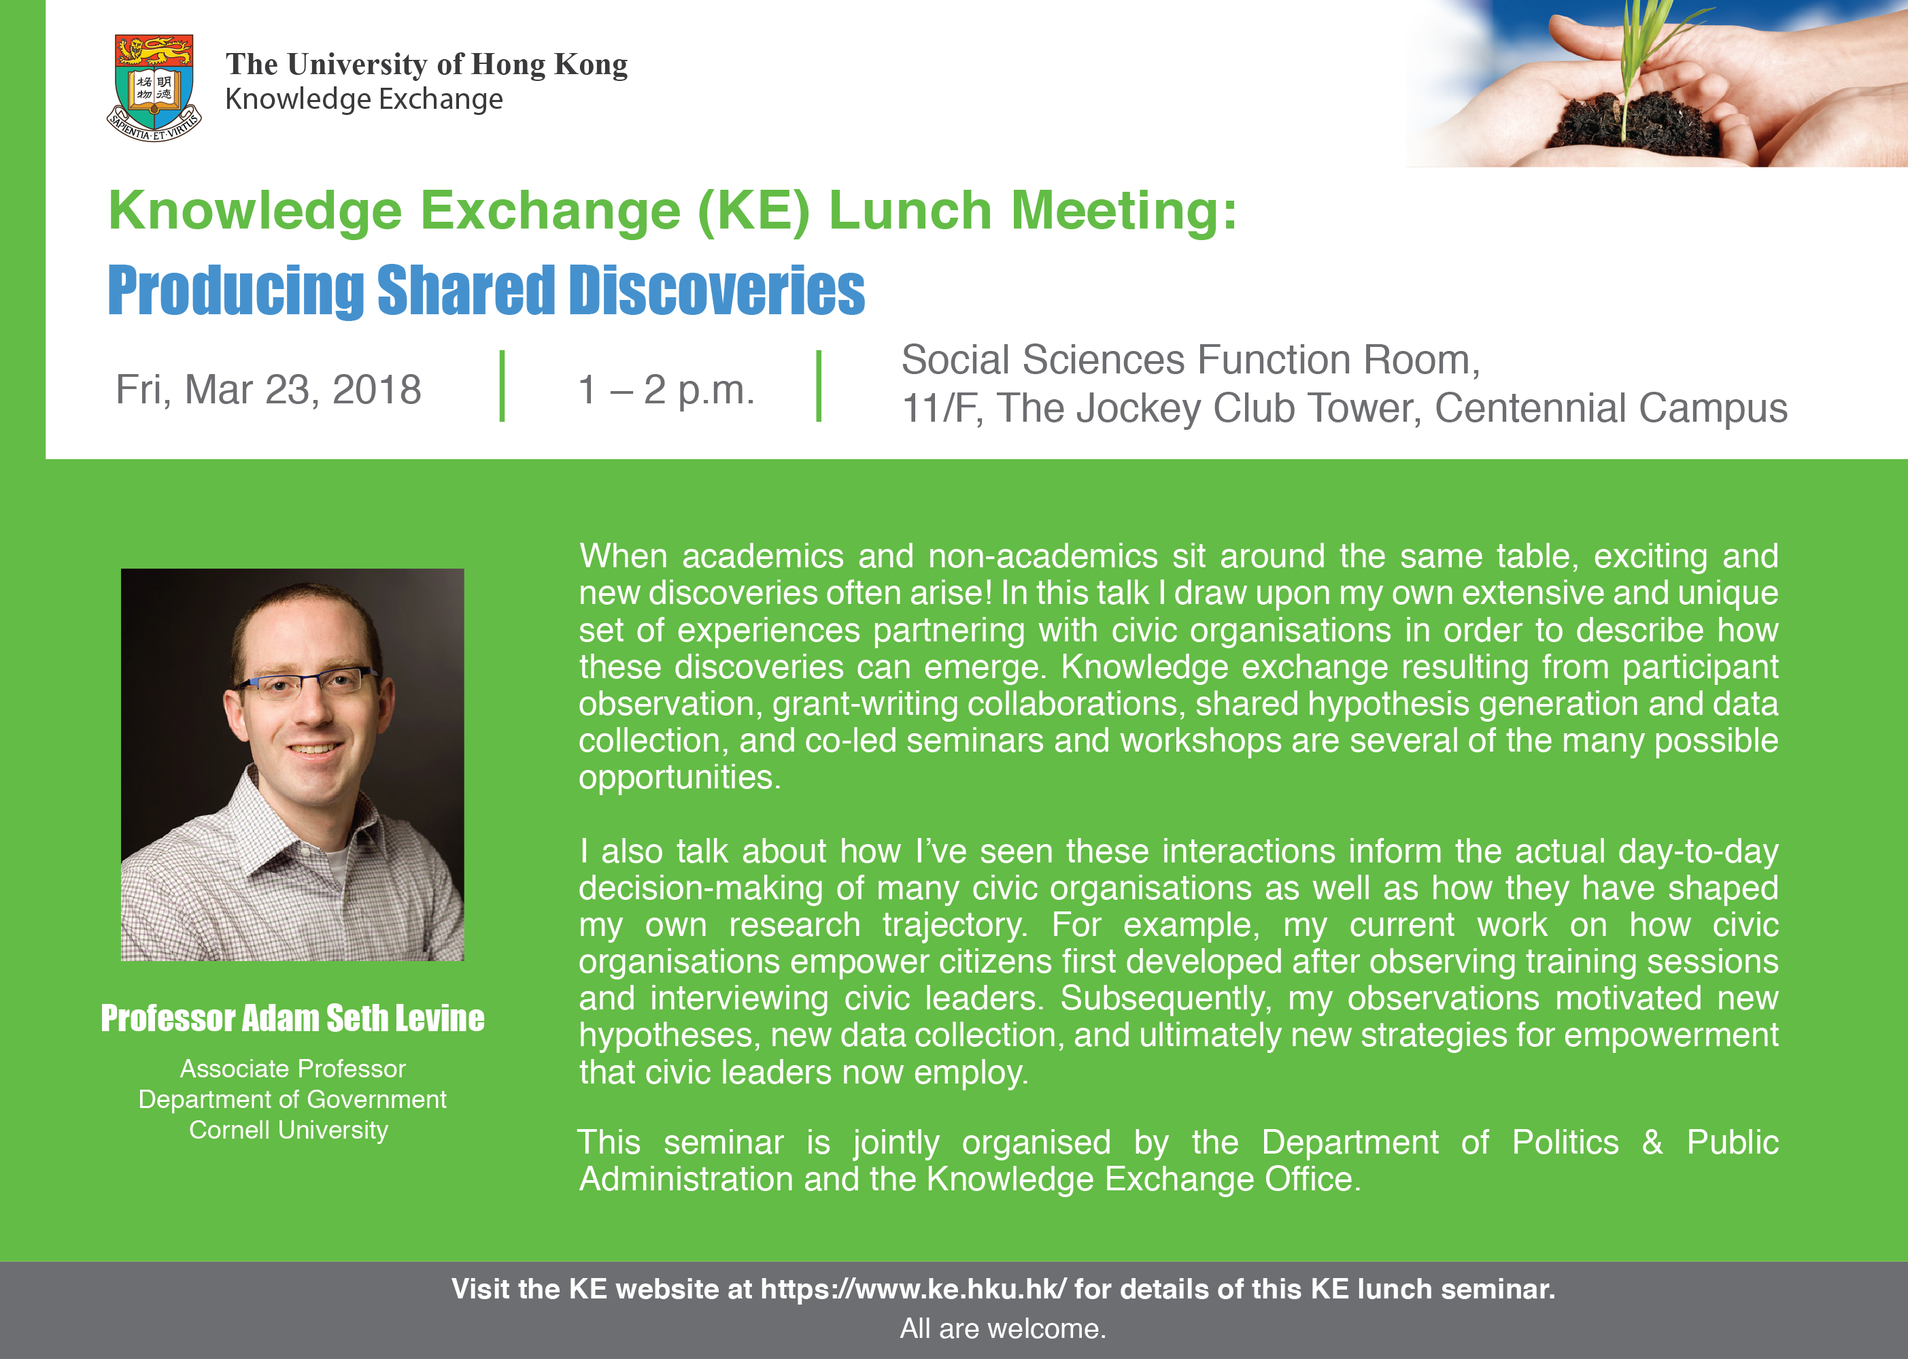 KE Lunch Meeting: Producing Shared Discoveries